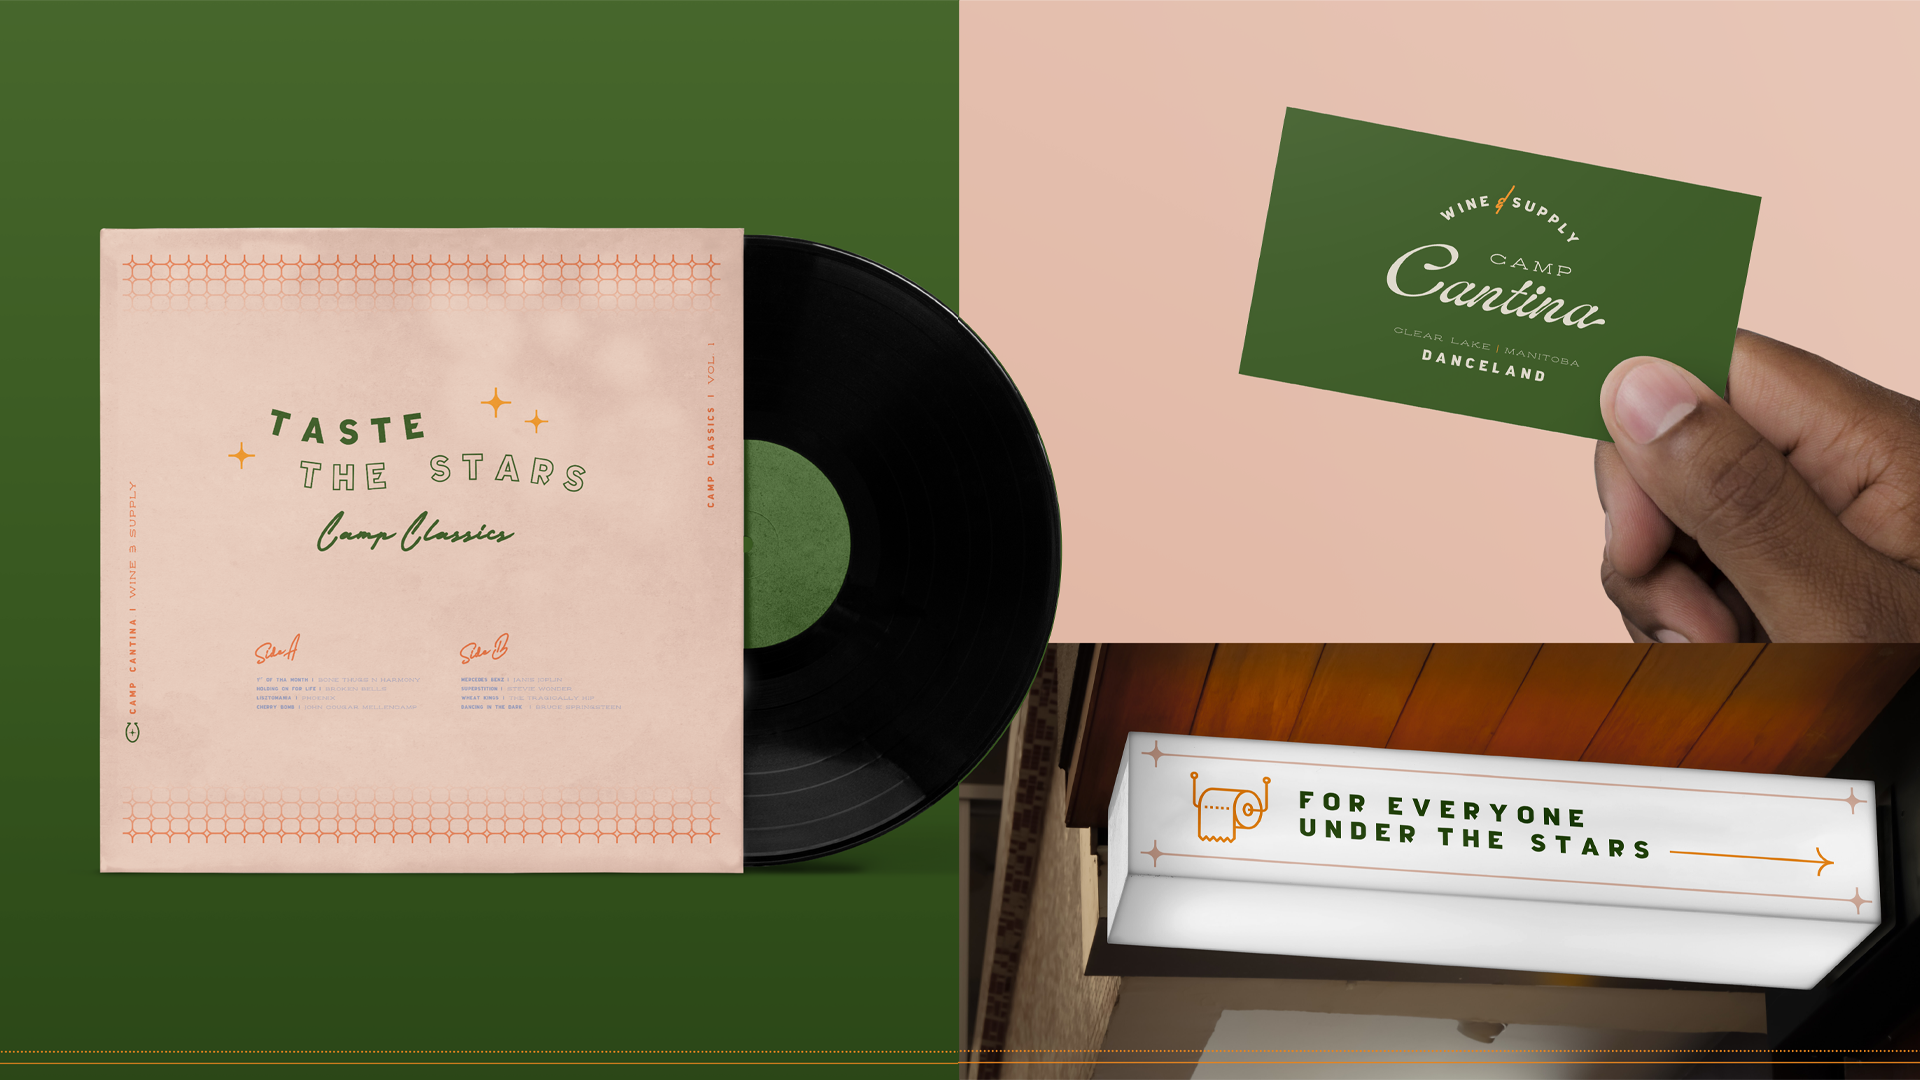 Camp Cantina branding on a record, business card and bathroom sign.